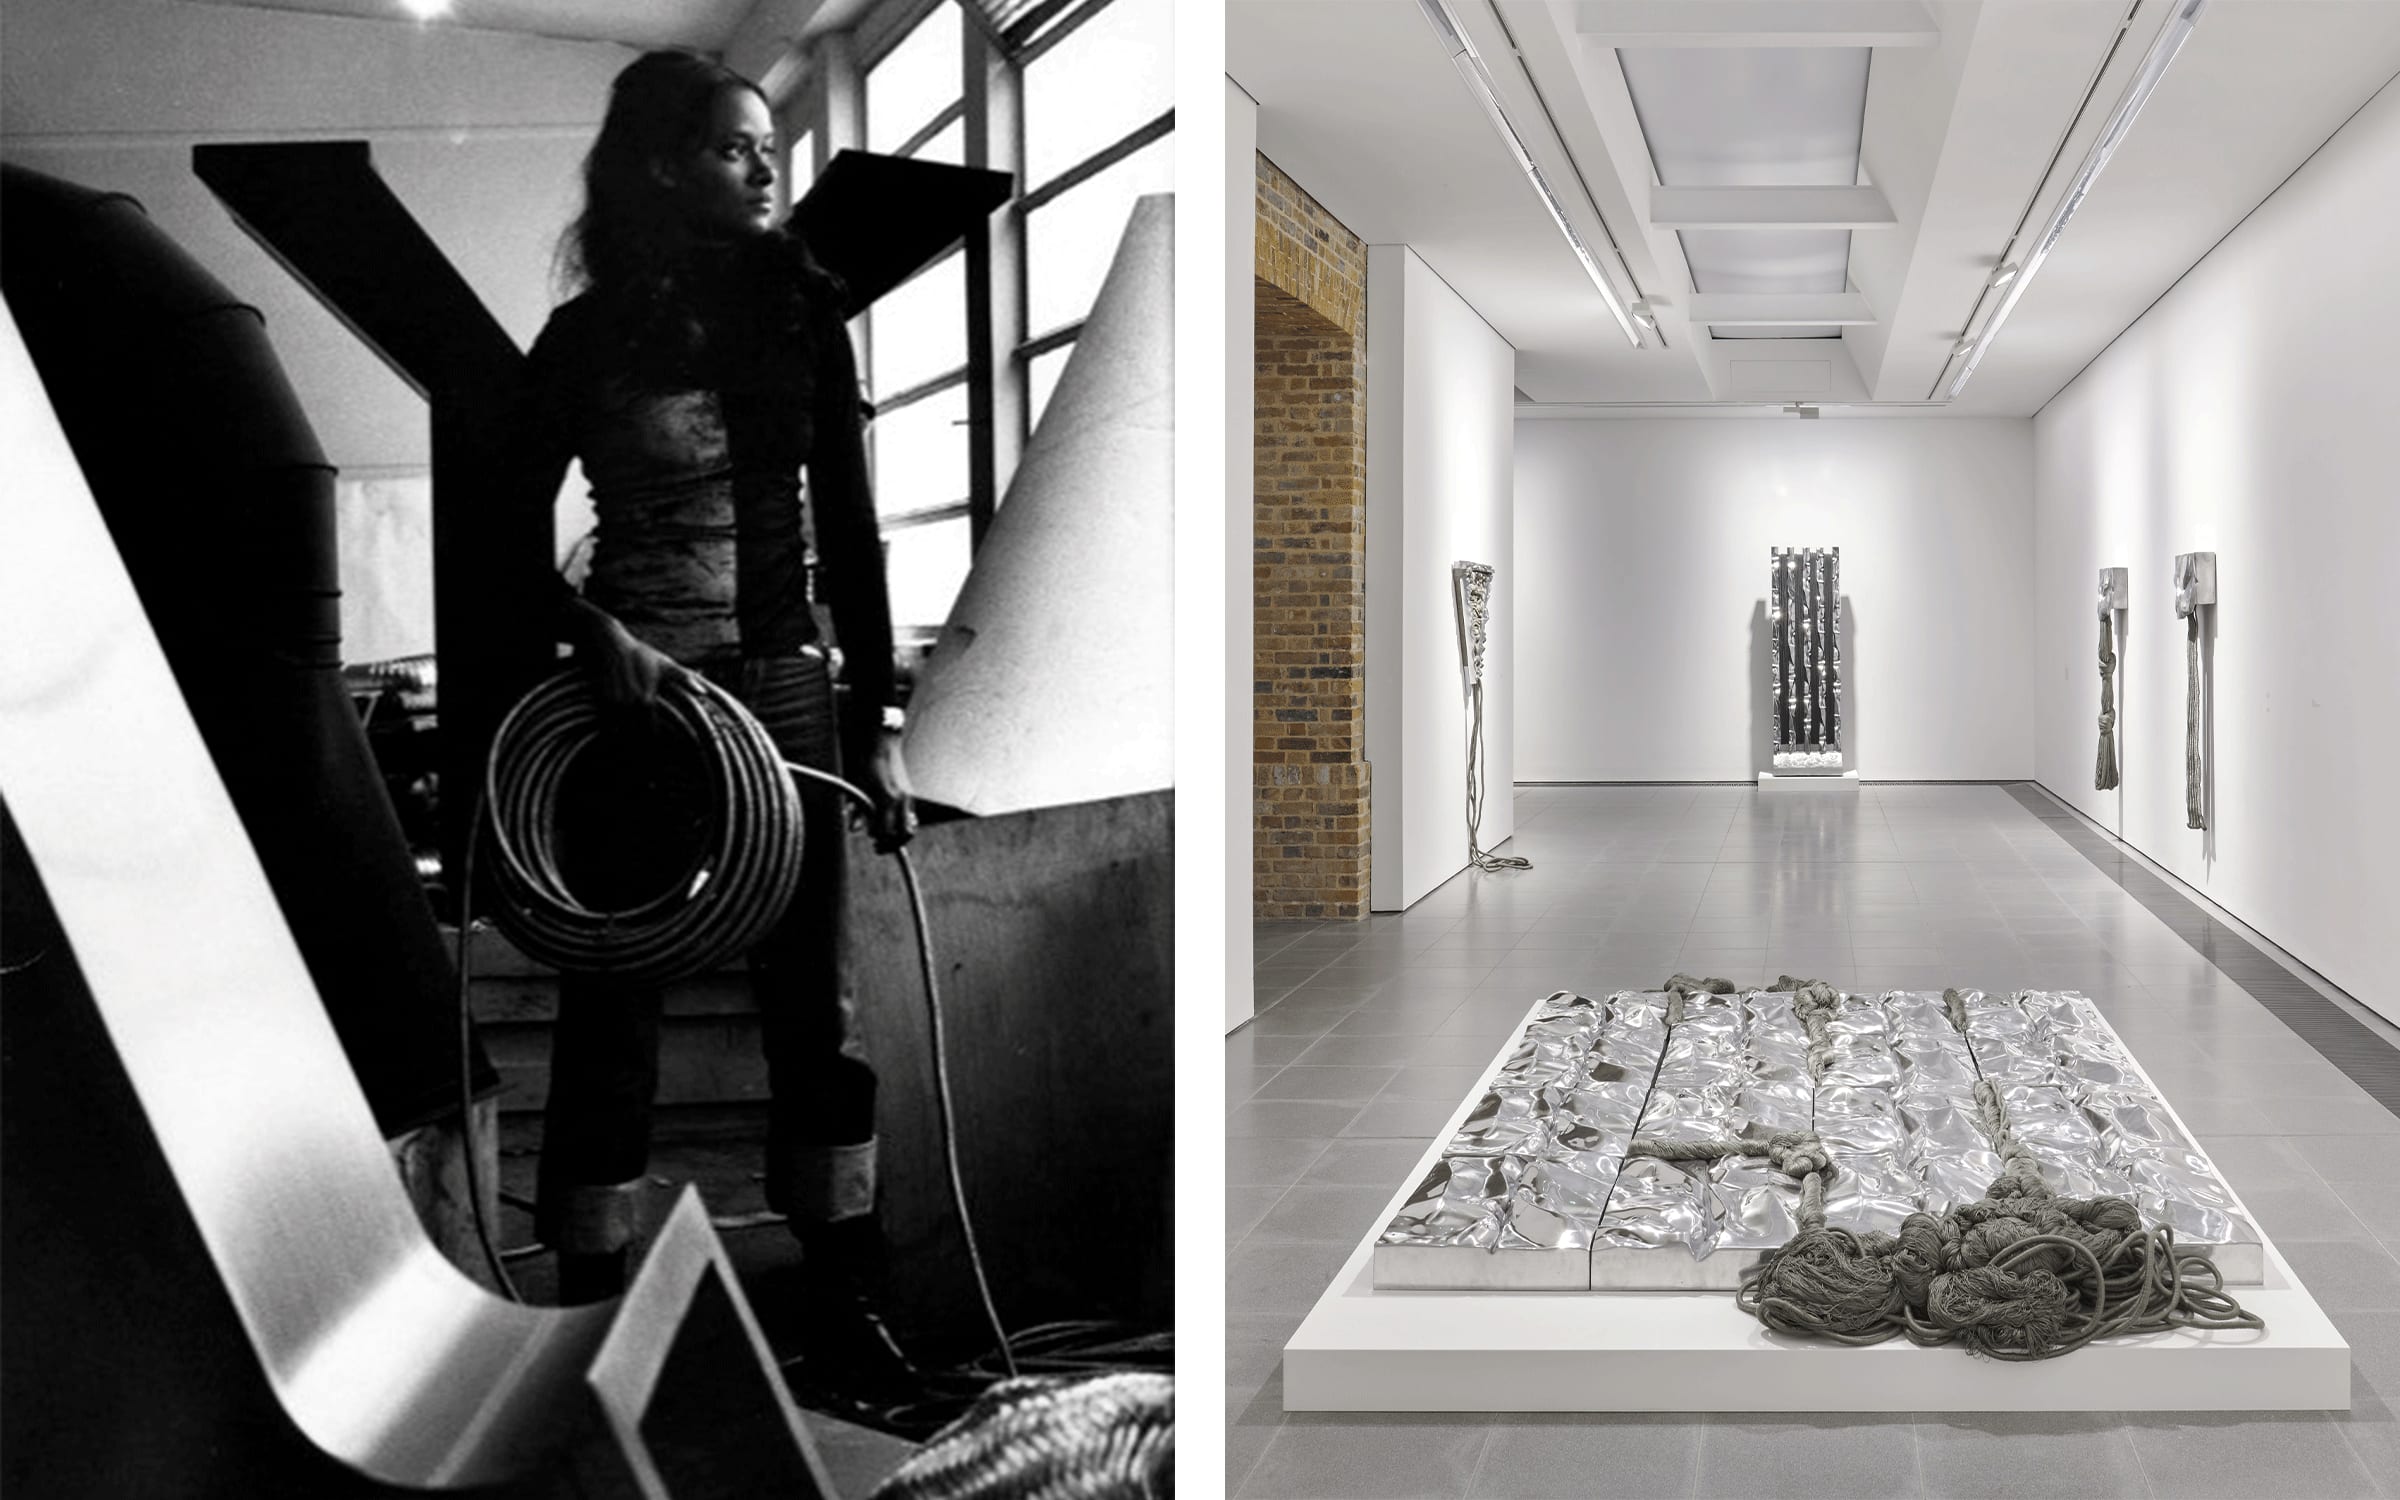 Left: Barbara Chase-Riboud at her atelier on Rue Dutot, Paris, 1973. Photograph by Marc Riboud, courtesy of the artist. Right: Installation view of Barbara Chase-Riboud’s exhibition ‘Infinite Folds’ at Serpentine North, London, 2022. Photographs by Jo Underhill. Courtesy of the artist and Serpentine.